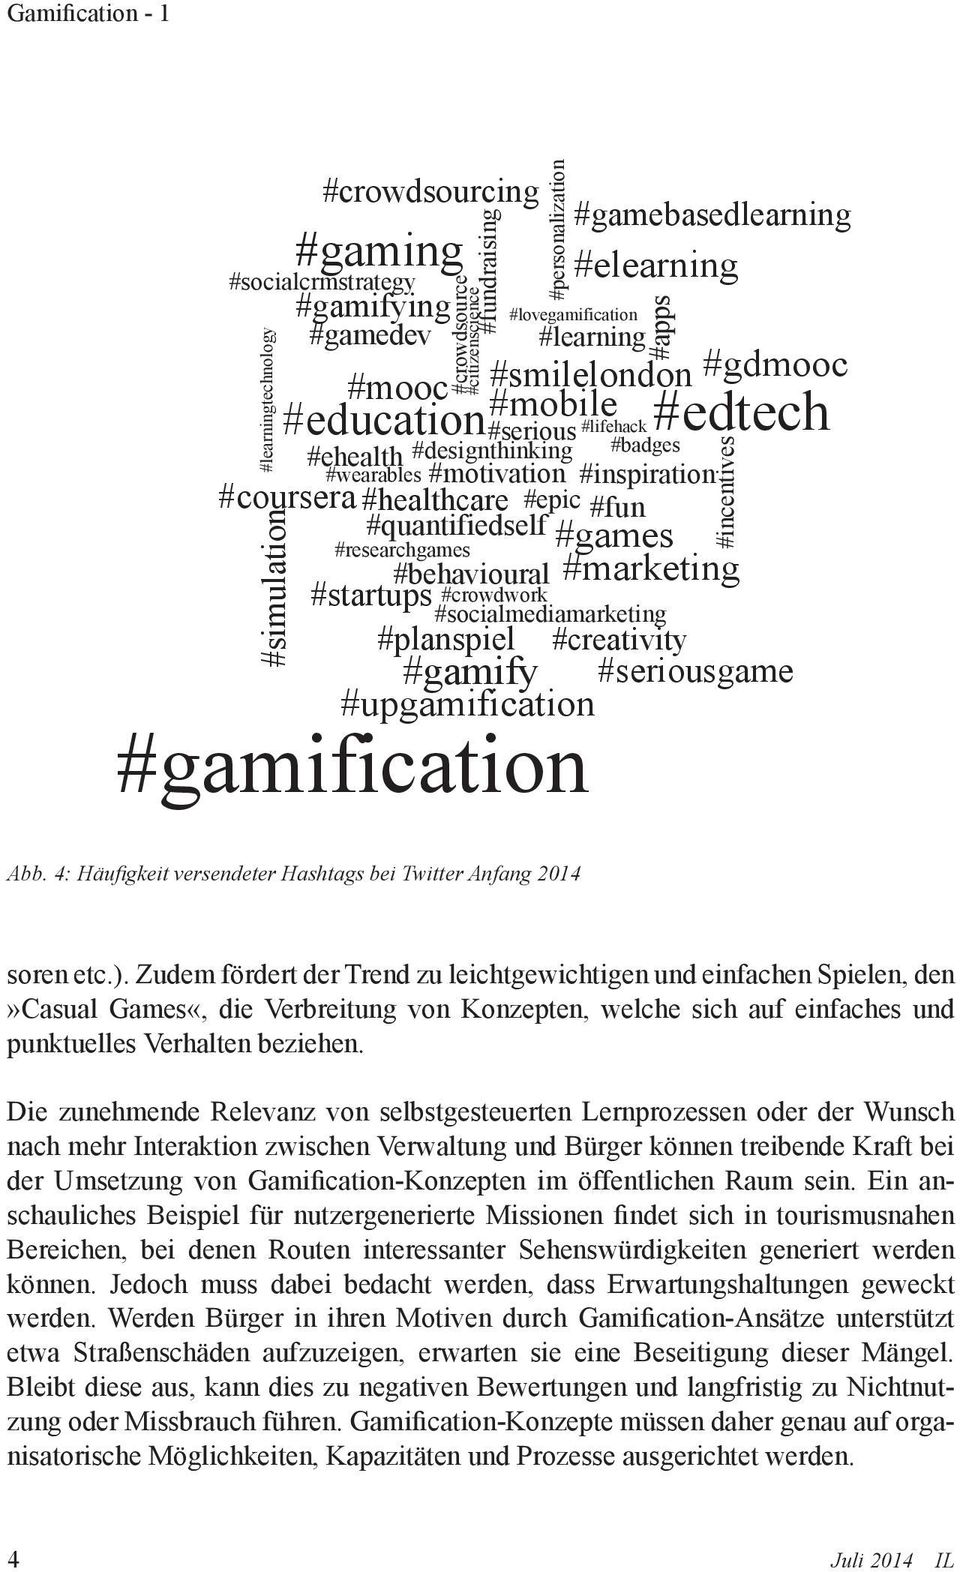 #startups #crowdwork #socialmediamarketing #planspiel #personalization #apps #incentives #marketing #creativity #edtech #gamify #seriousgame #upgamification #gamification #gamebasedlearning